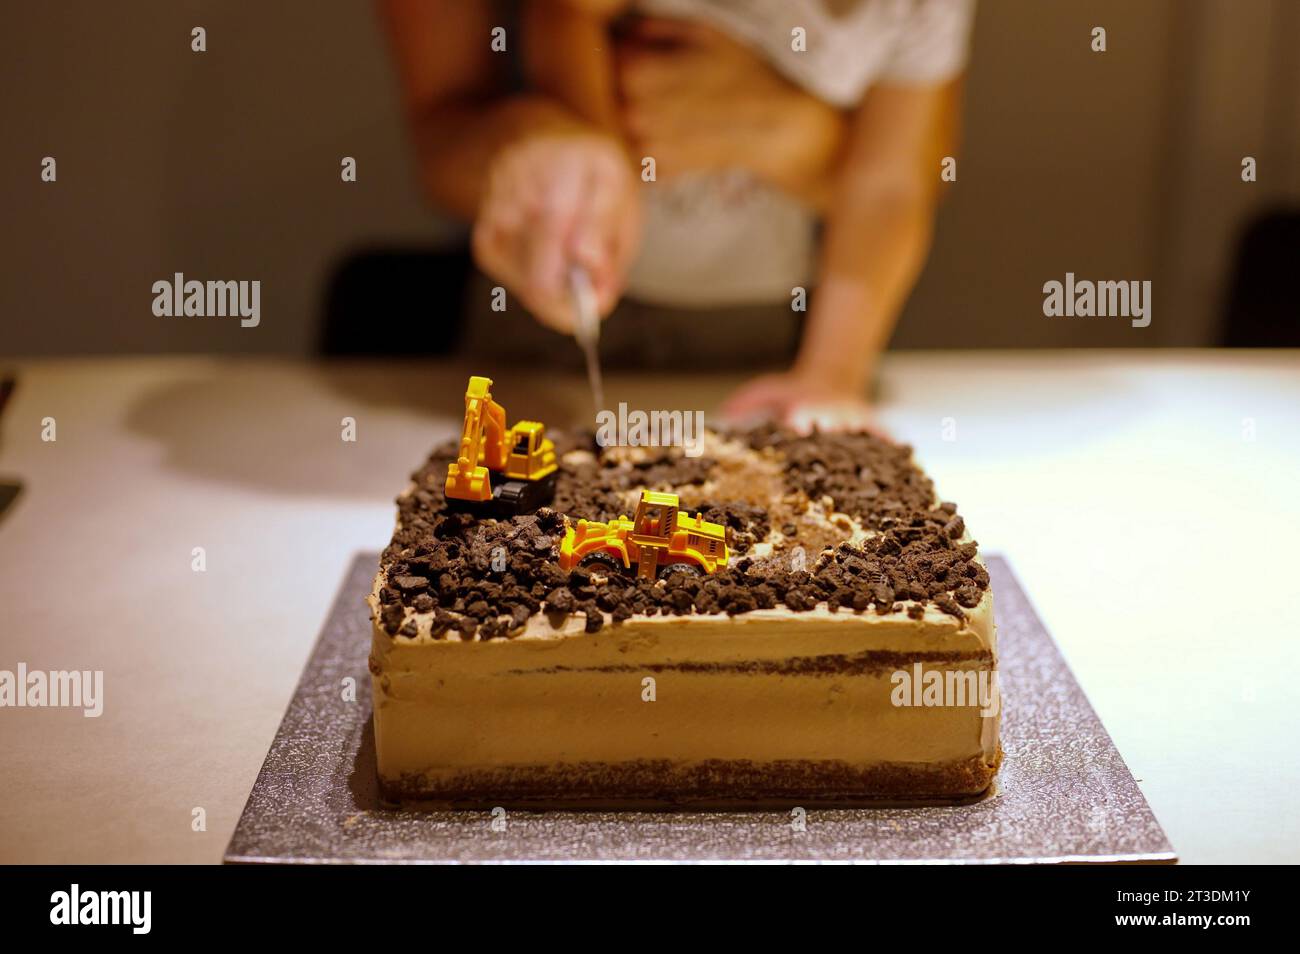 Midsection of mother and son cutting birthday cake Stock Photo